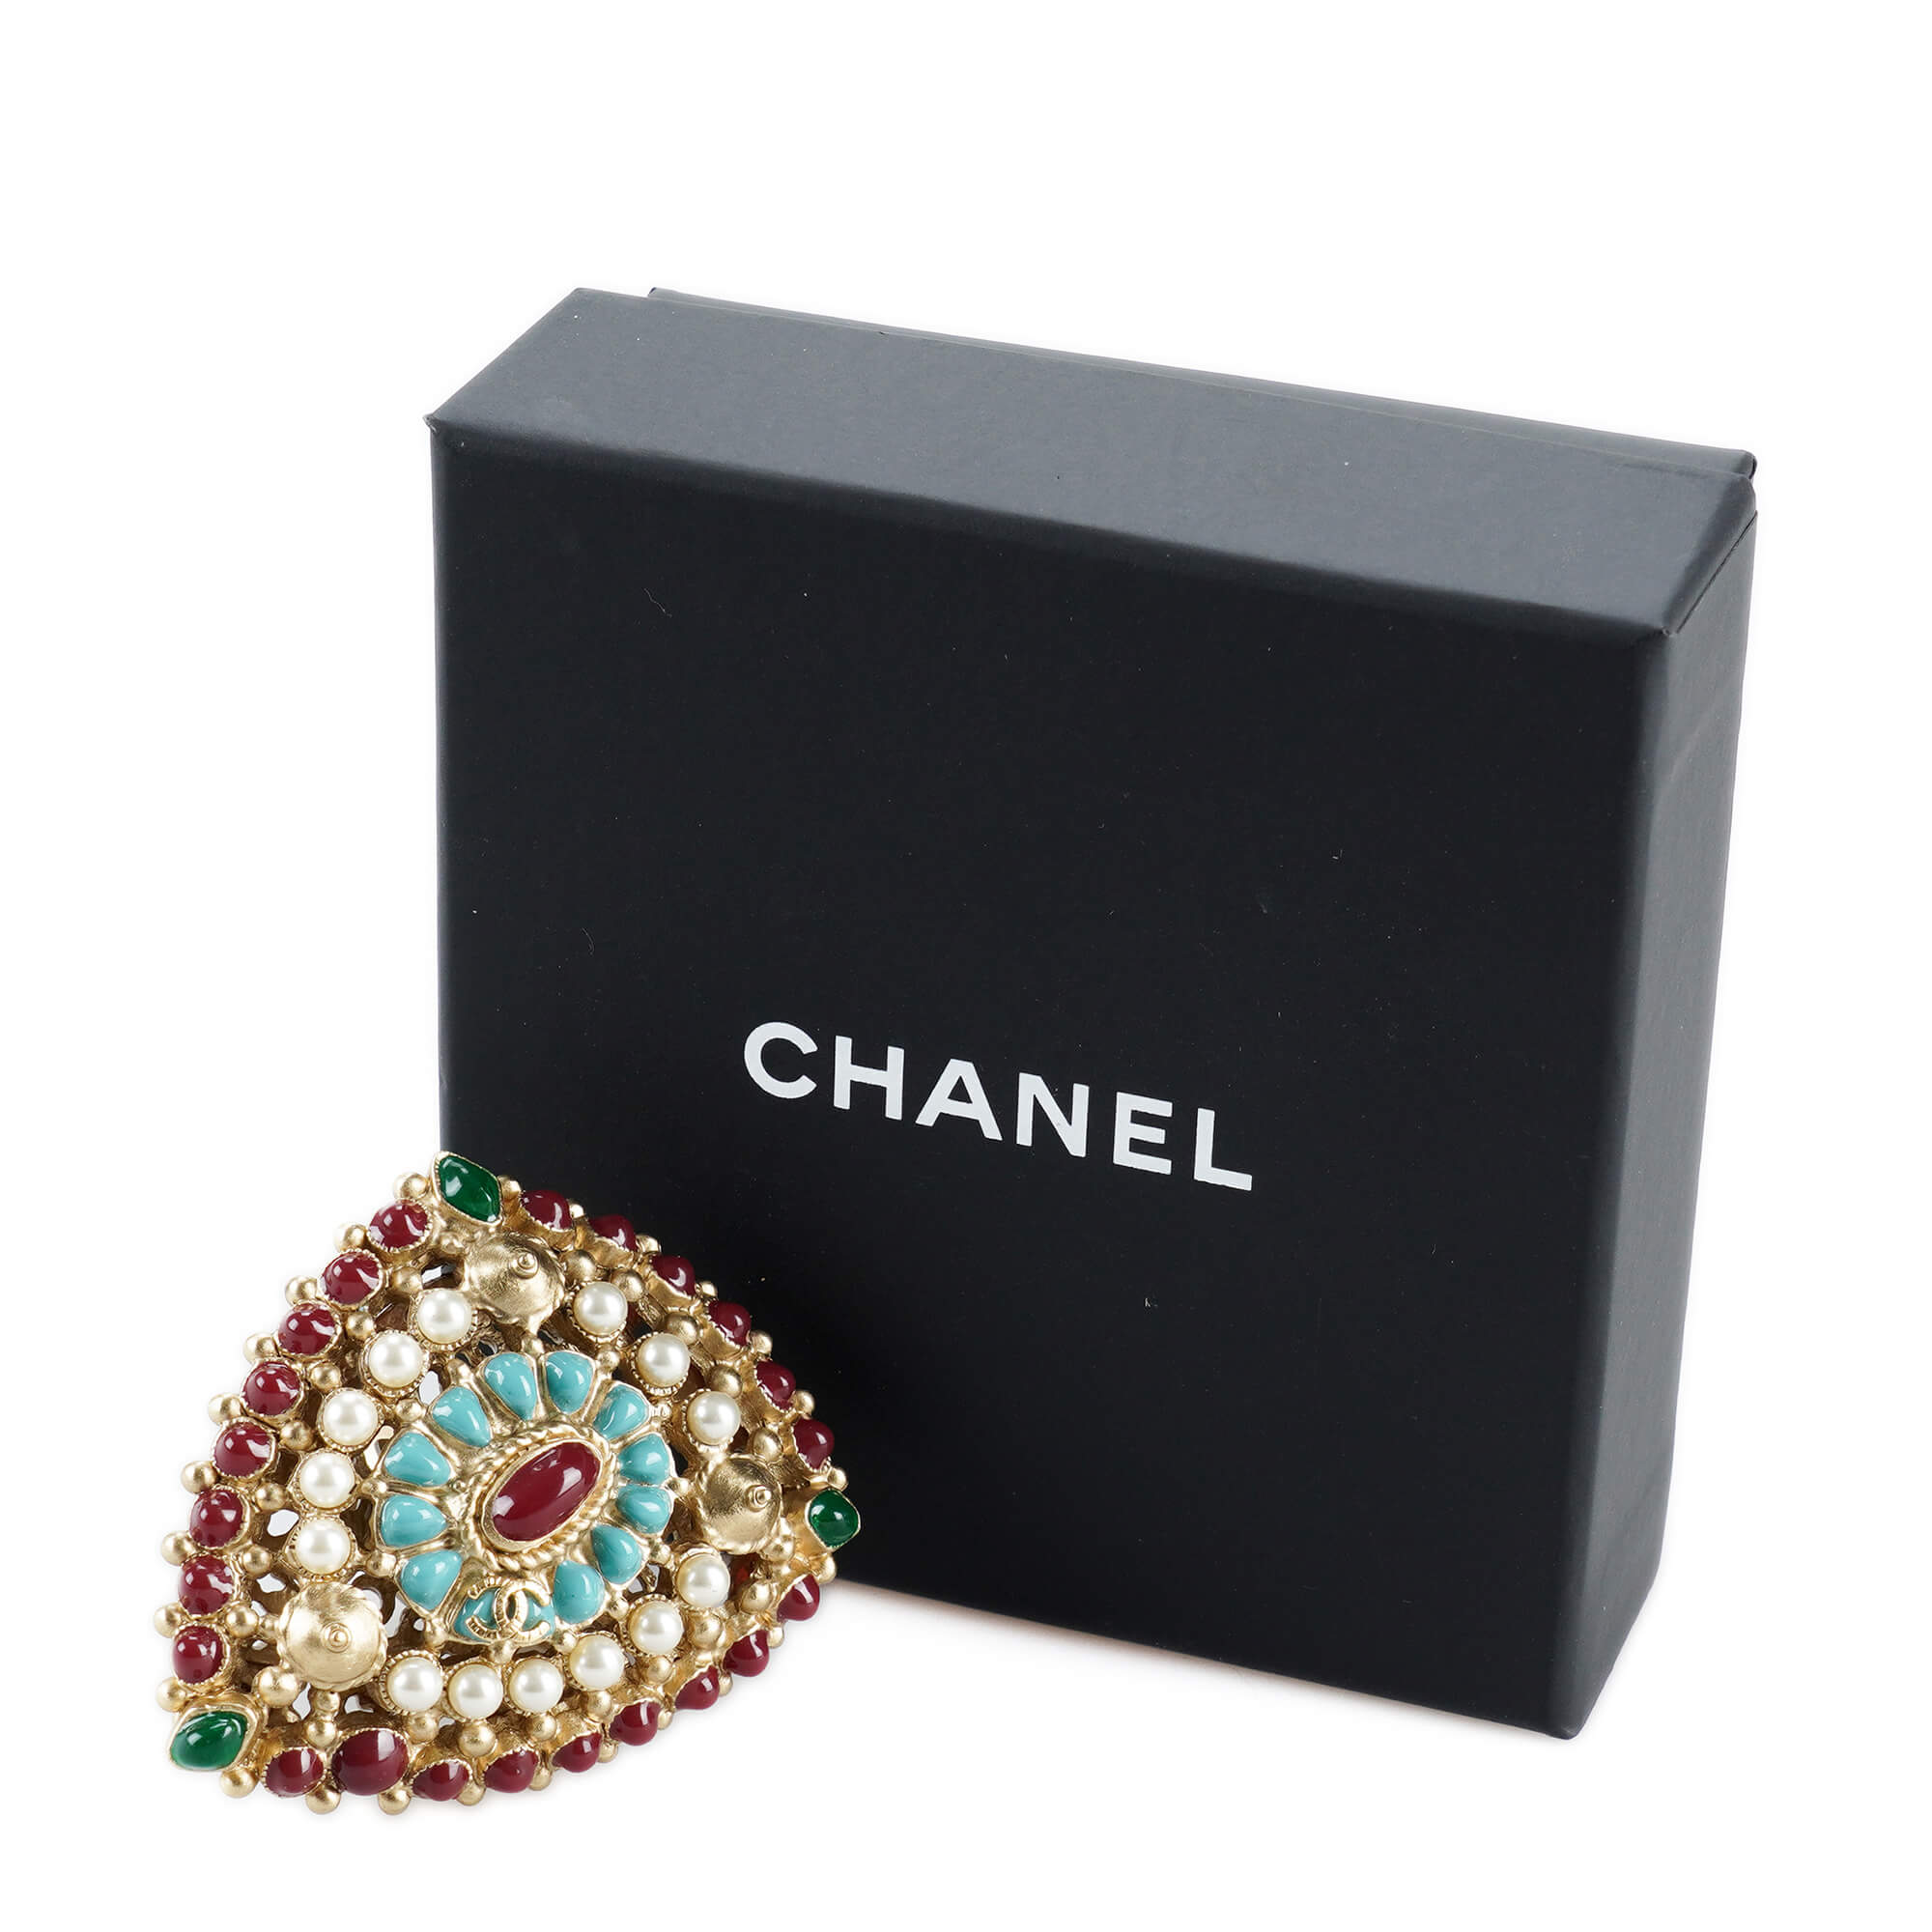 Chanel - Gripoix Faux Pearl Statement Cocktail Ring 